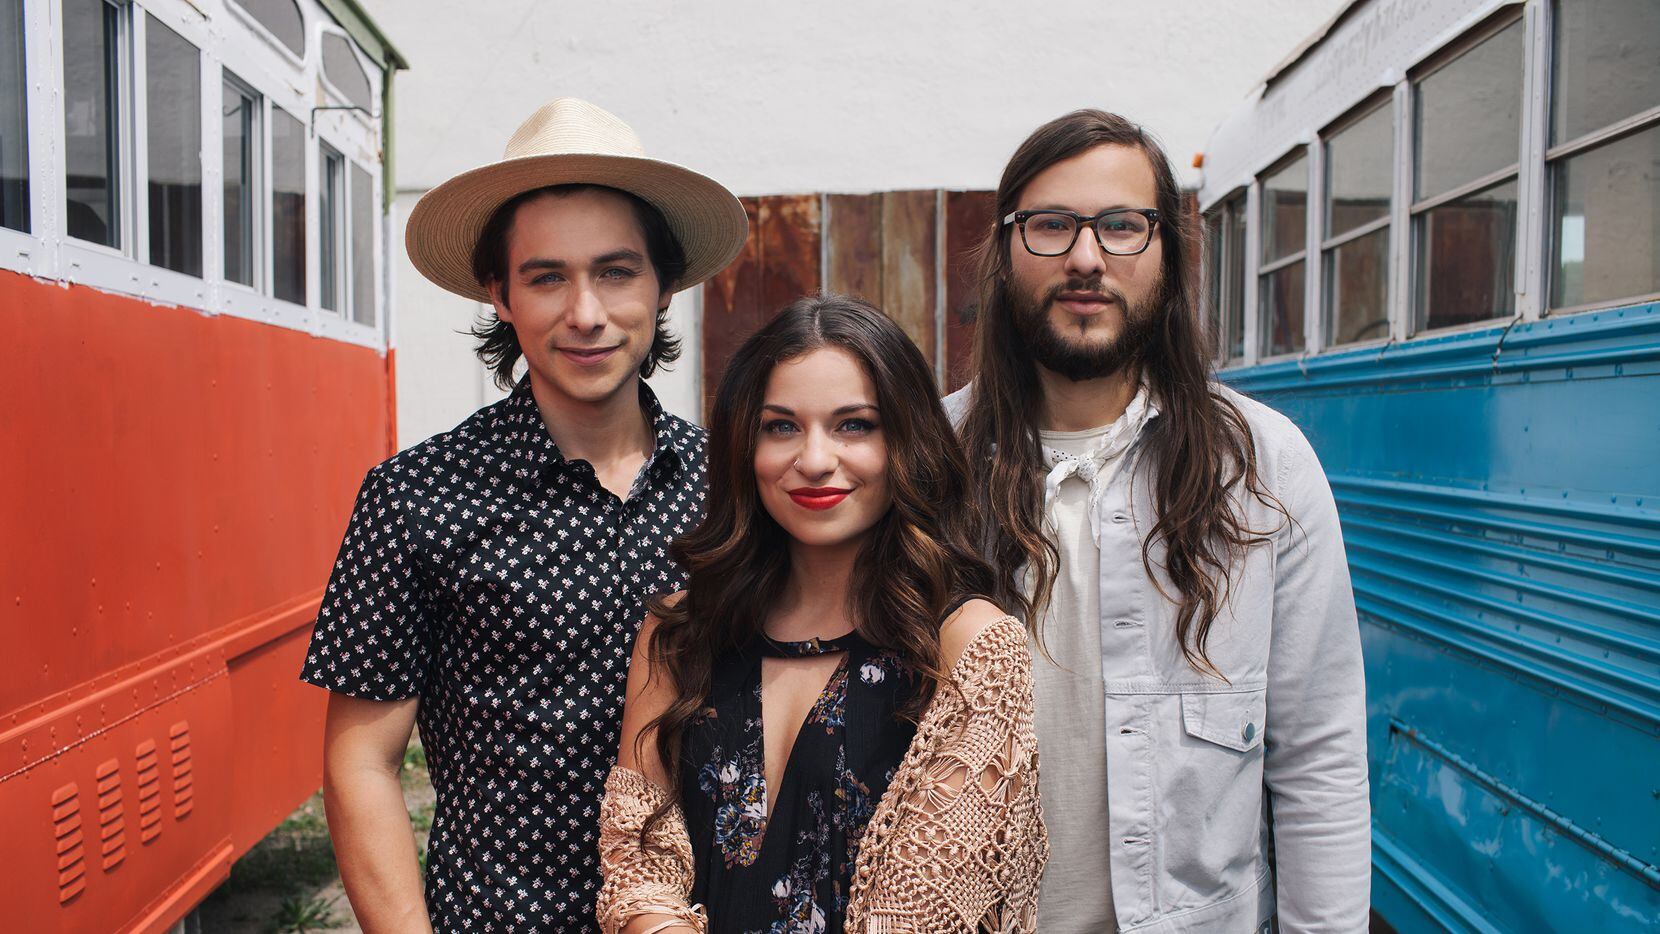 Jason Castro, Rockwall's onetime 'American Idol' phenom, sheds dreads,  joins siblings in new band